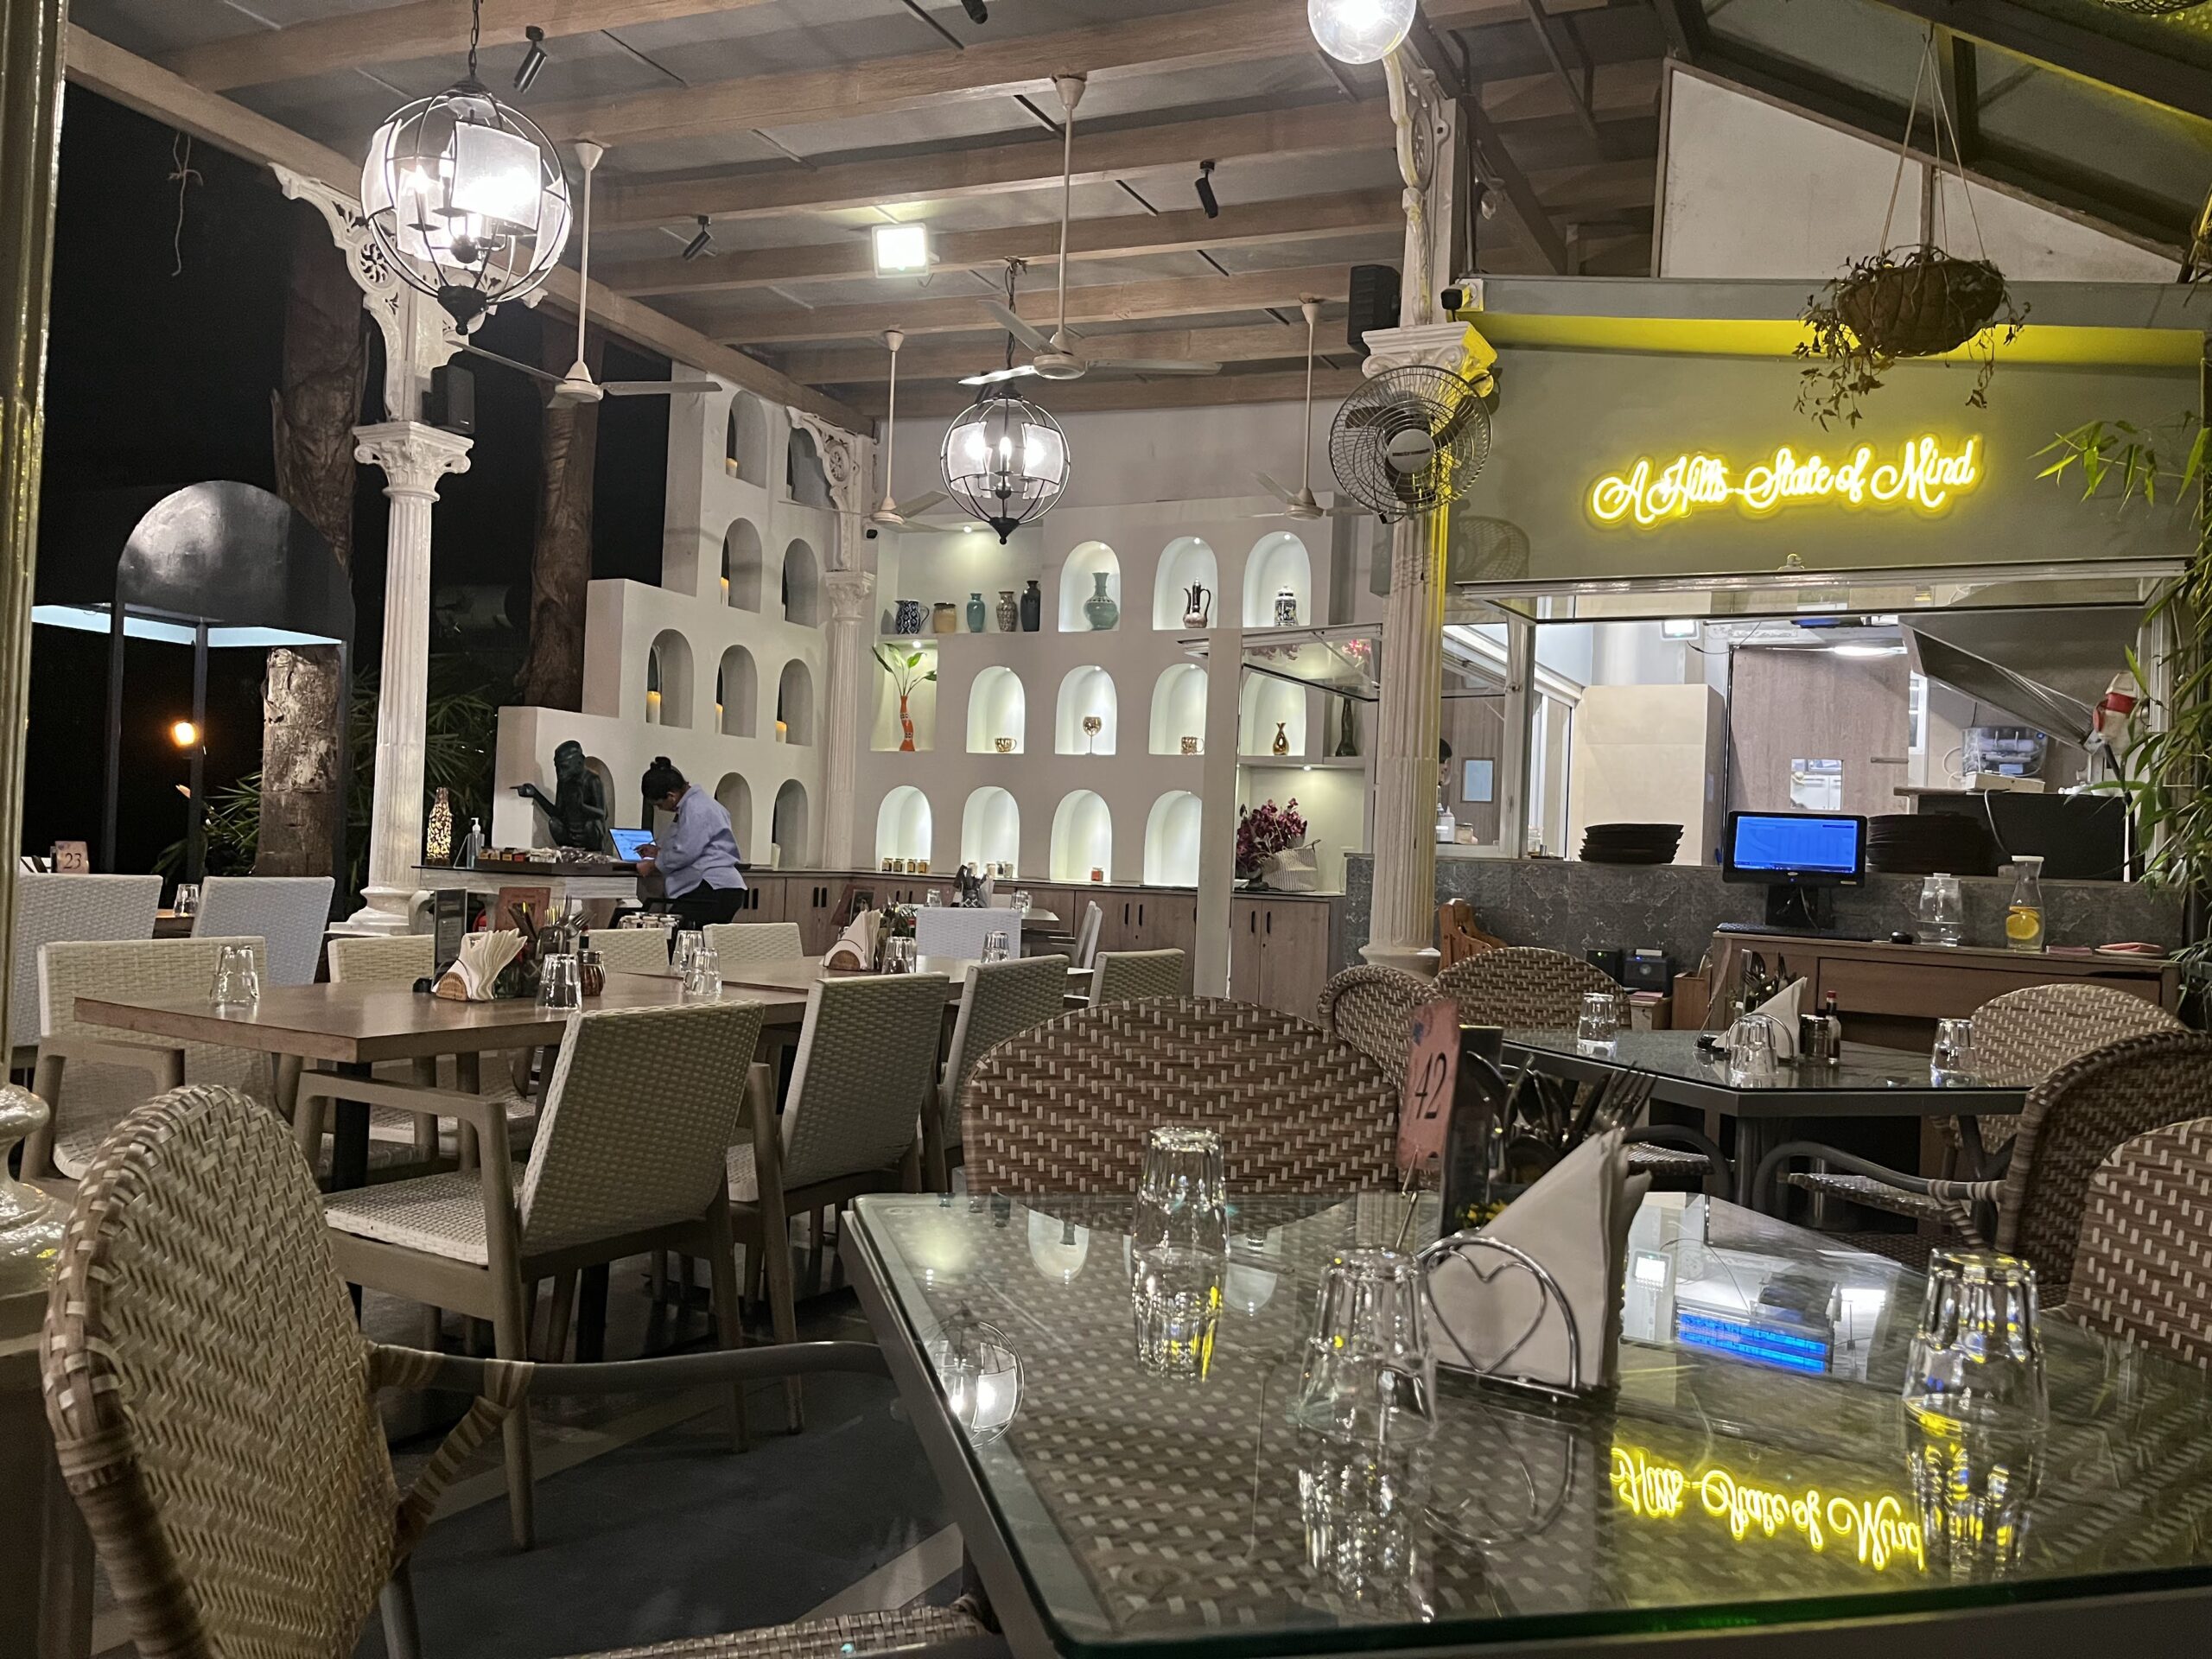 Anglo Indian Restaurant - Spacious and comfortable seating amid nature